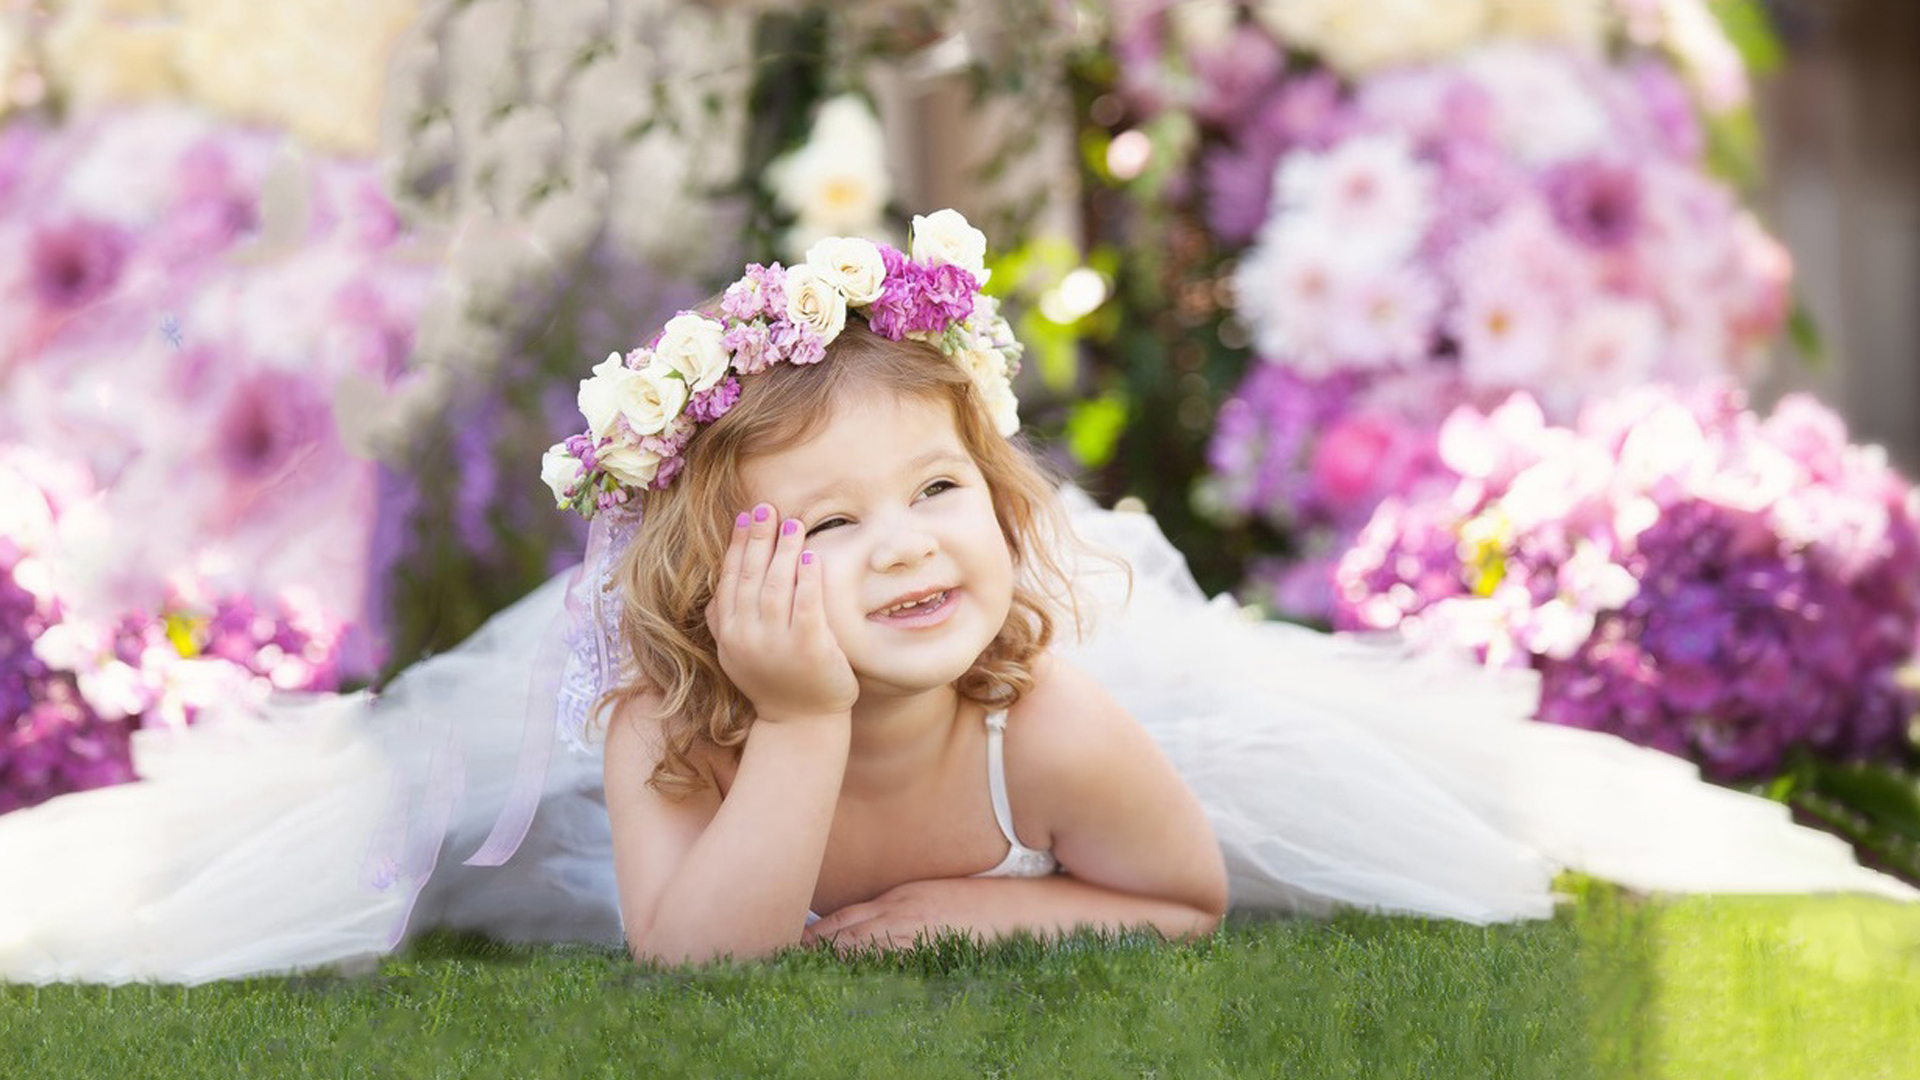 Cute Smiley Girl Is Lying Down On Green Grass Holding Face With Hand Wearing White Dress And Flowers Wreath 2K Cute